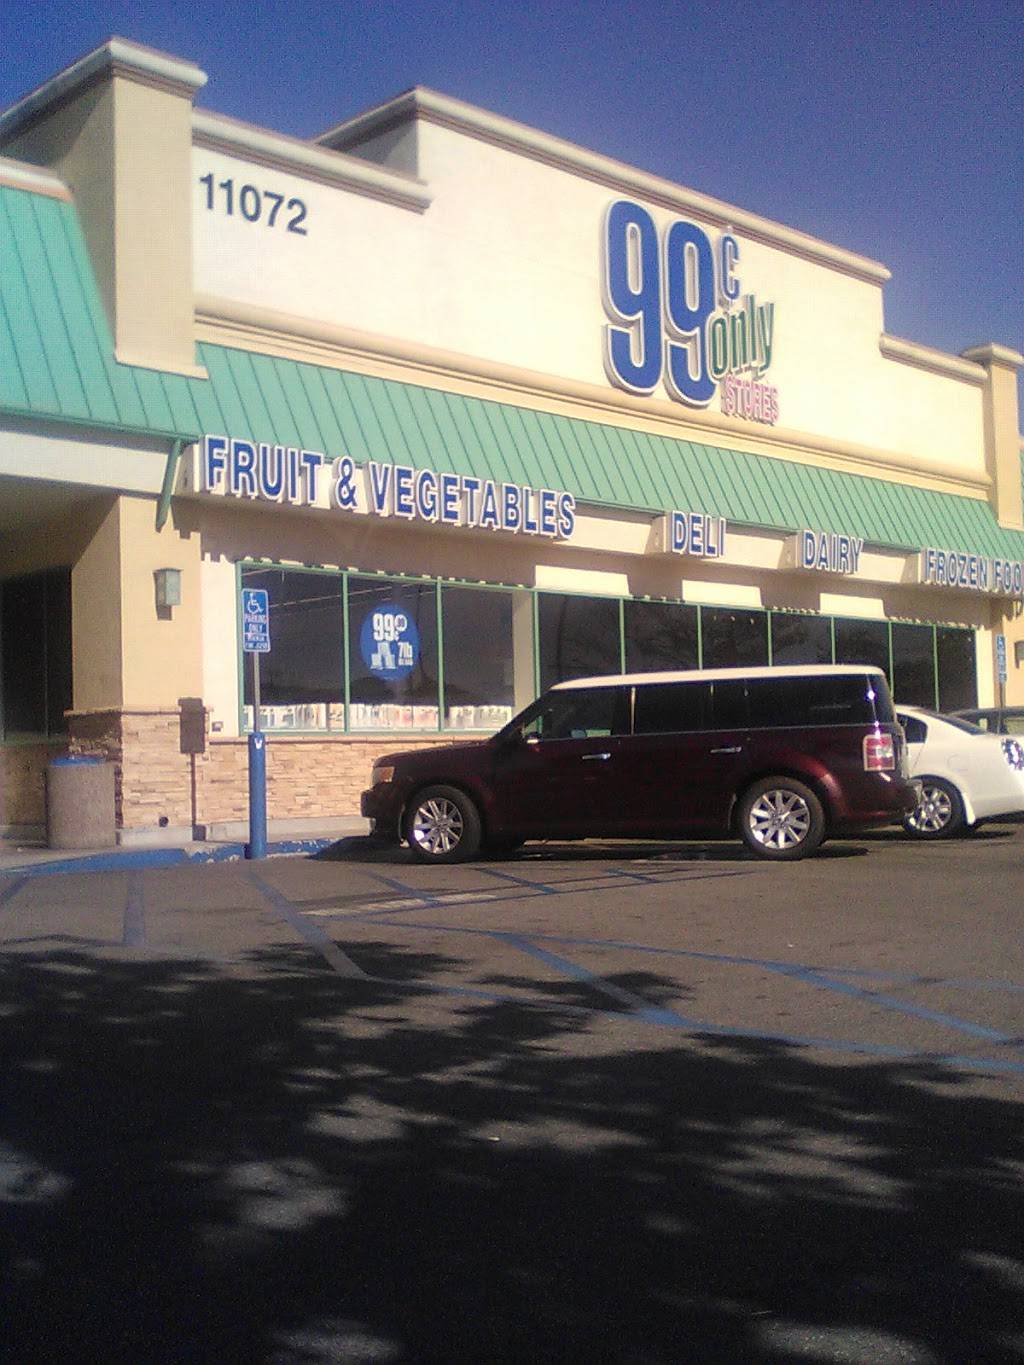 99 Cents Only Stores | 11072 Magnolia St, Garden Grove, CA 92841 | Phone: (714) 636-3066